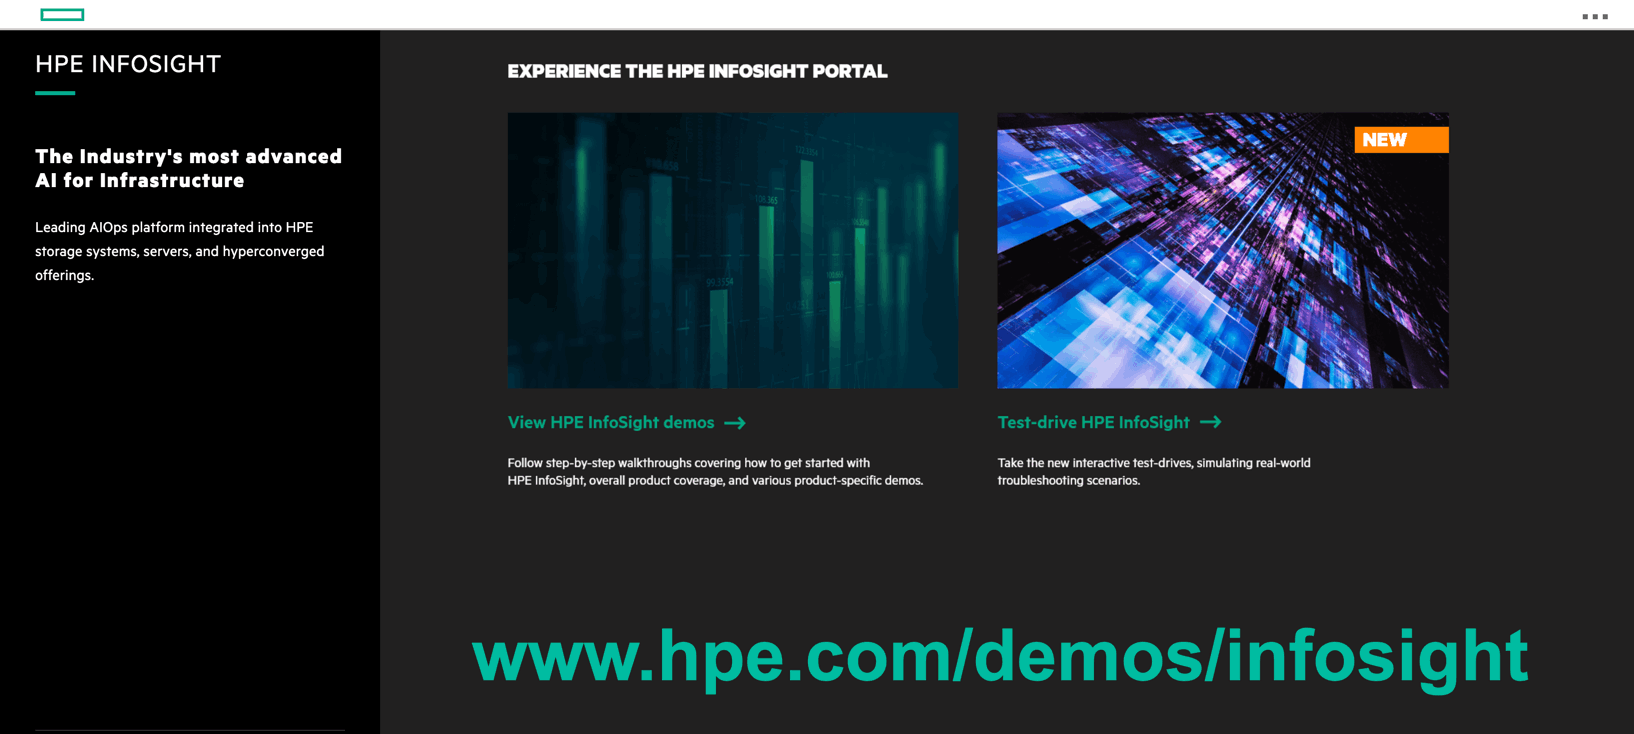 The main landing page for the HPE InfoSight demo portal